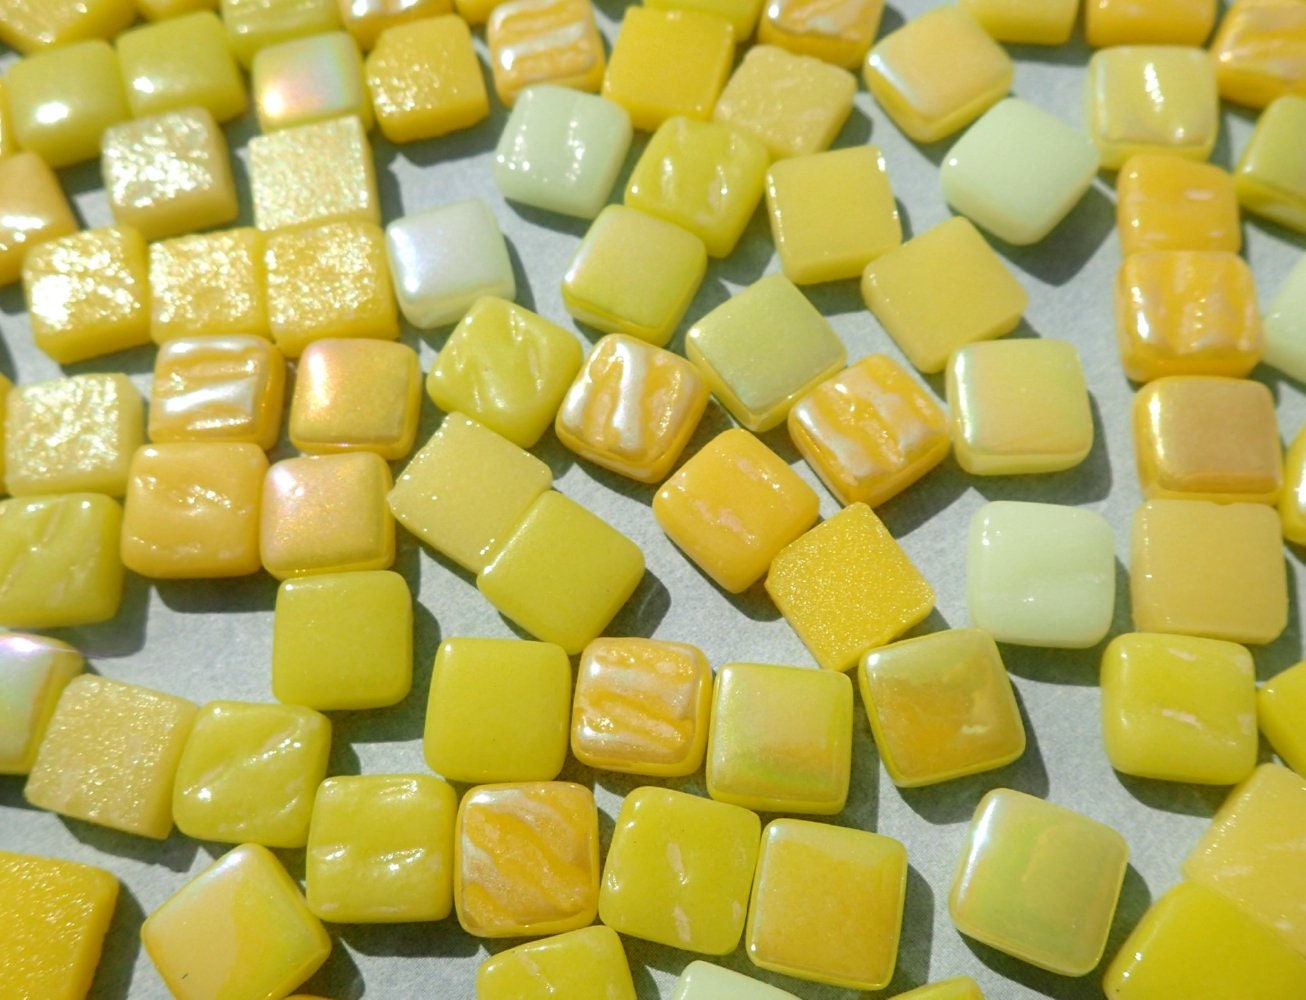 Ripe Lemons Mix Mini Glass Tiles - 8mm Square - 50 grams Opaque Glass Solid Color Mix of Bright and Pale Yellow Iridescent and Matte Tiles